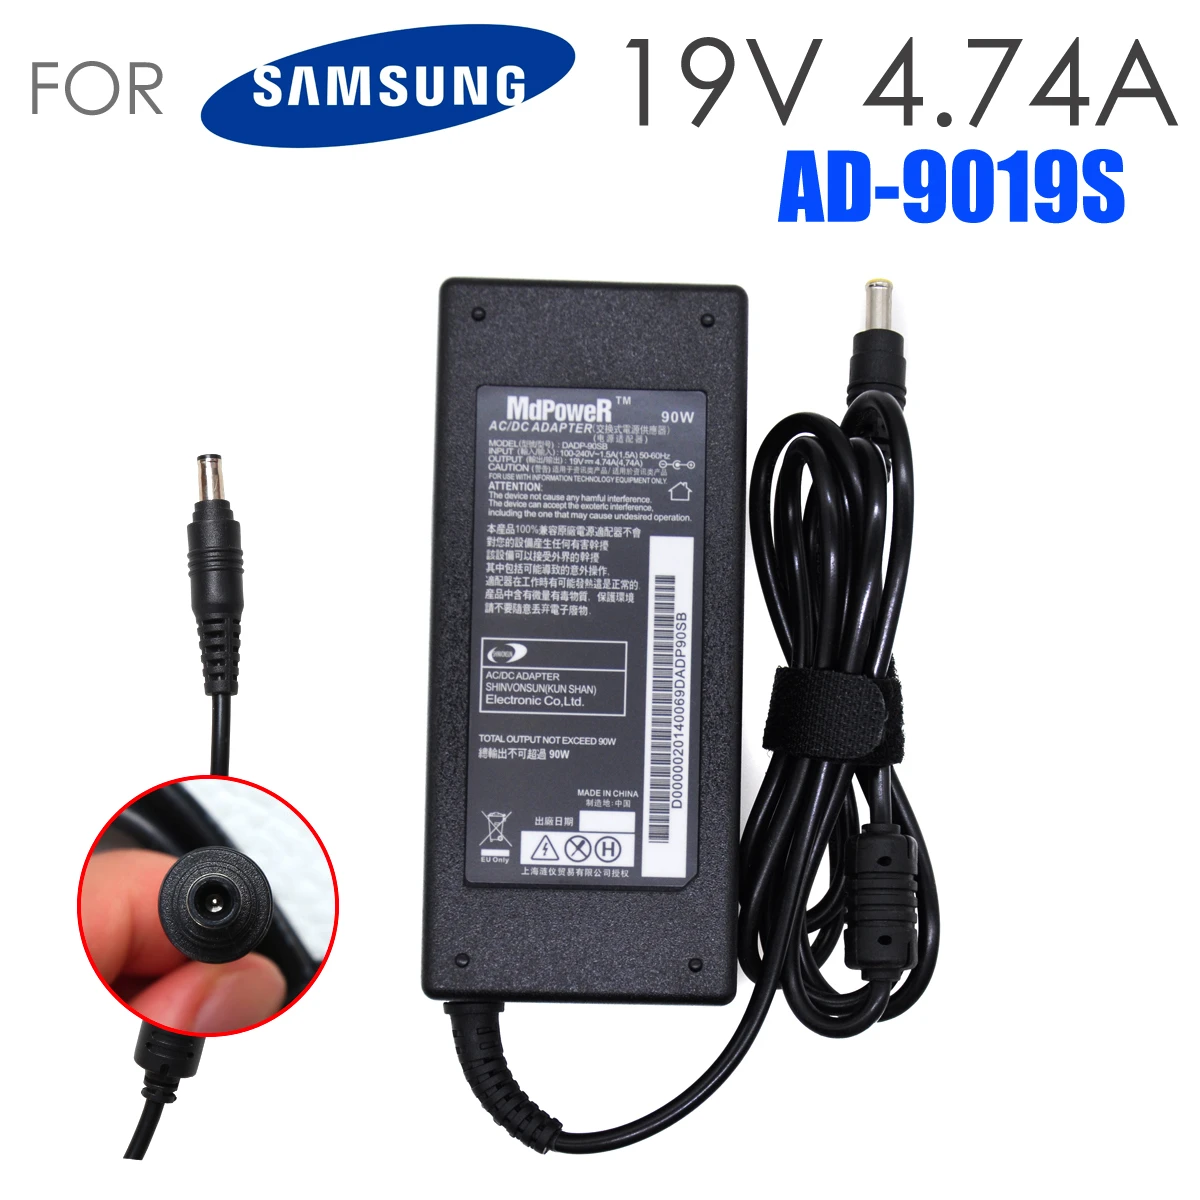 For samsung R580 R590 R610 R65 R540 R560 R580 R610 R65 R700 RC530 RF509 RF510  laptop power supply AC adapter charger 19V 4.74A external fan for laptop